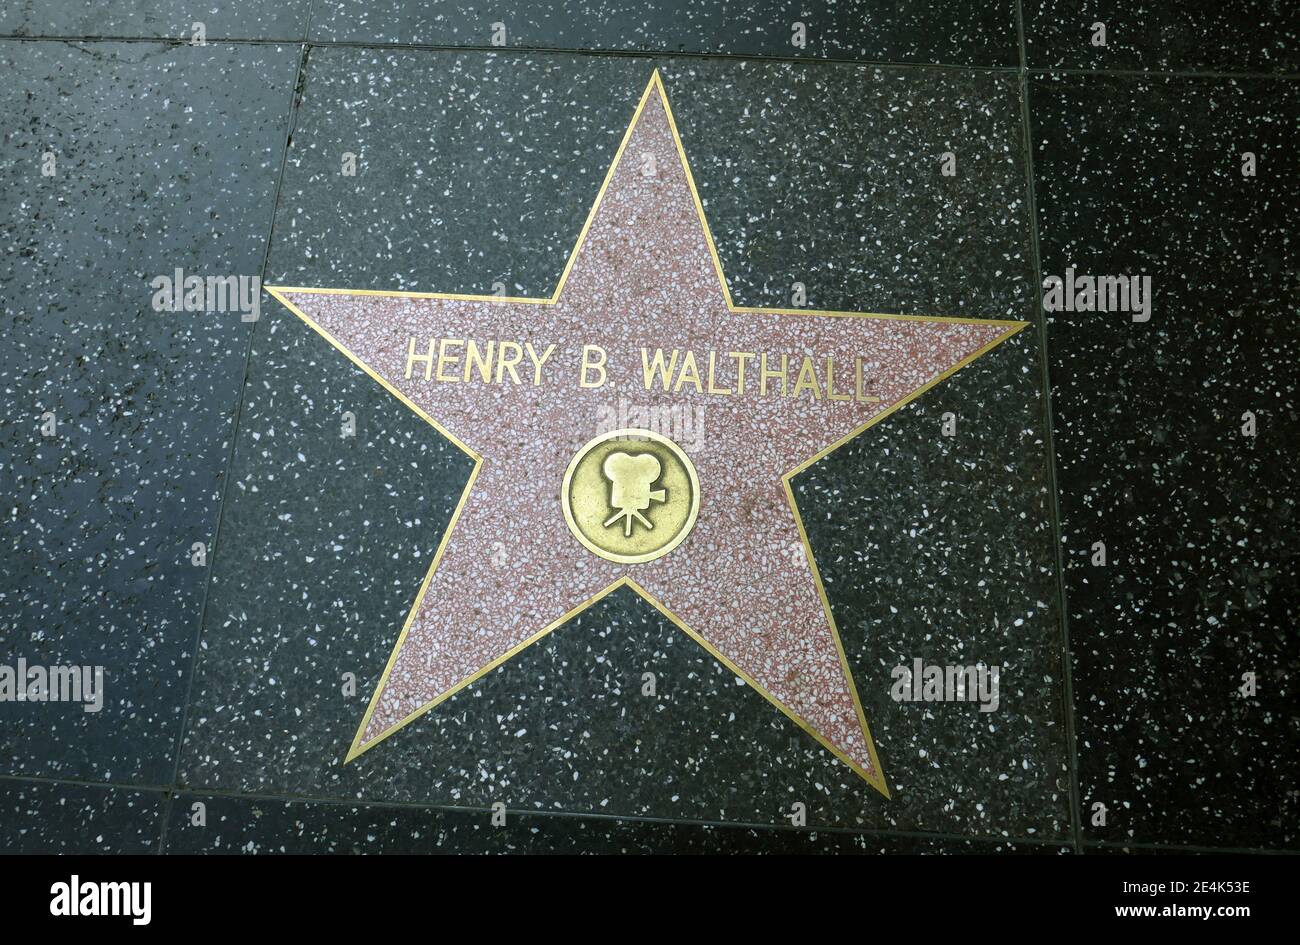 Los Angeles, California, USA 20th January 2021 A general view of atmosphere of actor Henry B. Walthall Star on Walk of Fame during Coronavirus Covid-19 Pandemic on January 20, 2021 in Los Angeles, California, USA. Photo by Barry King/Alamy Stock Photo Stock Photo